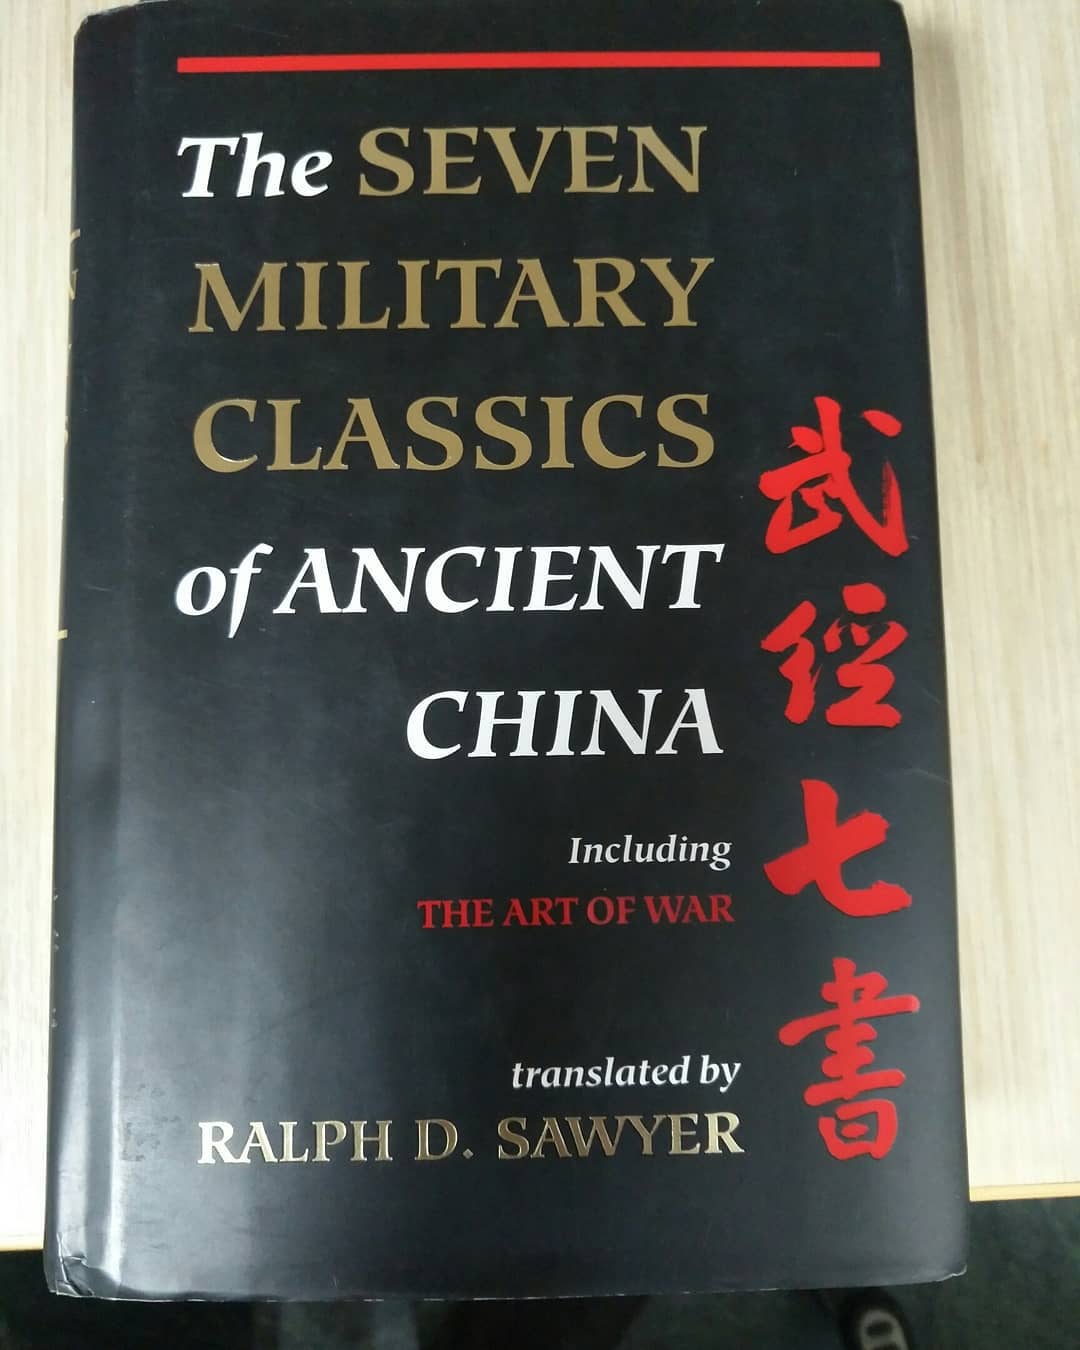 The Seven Military Classics of Ancient China by Ralph D Sawyer